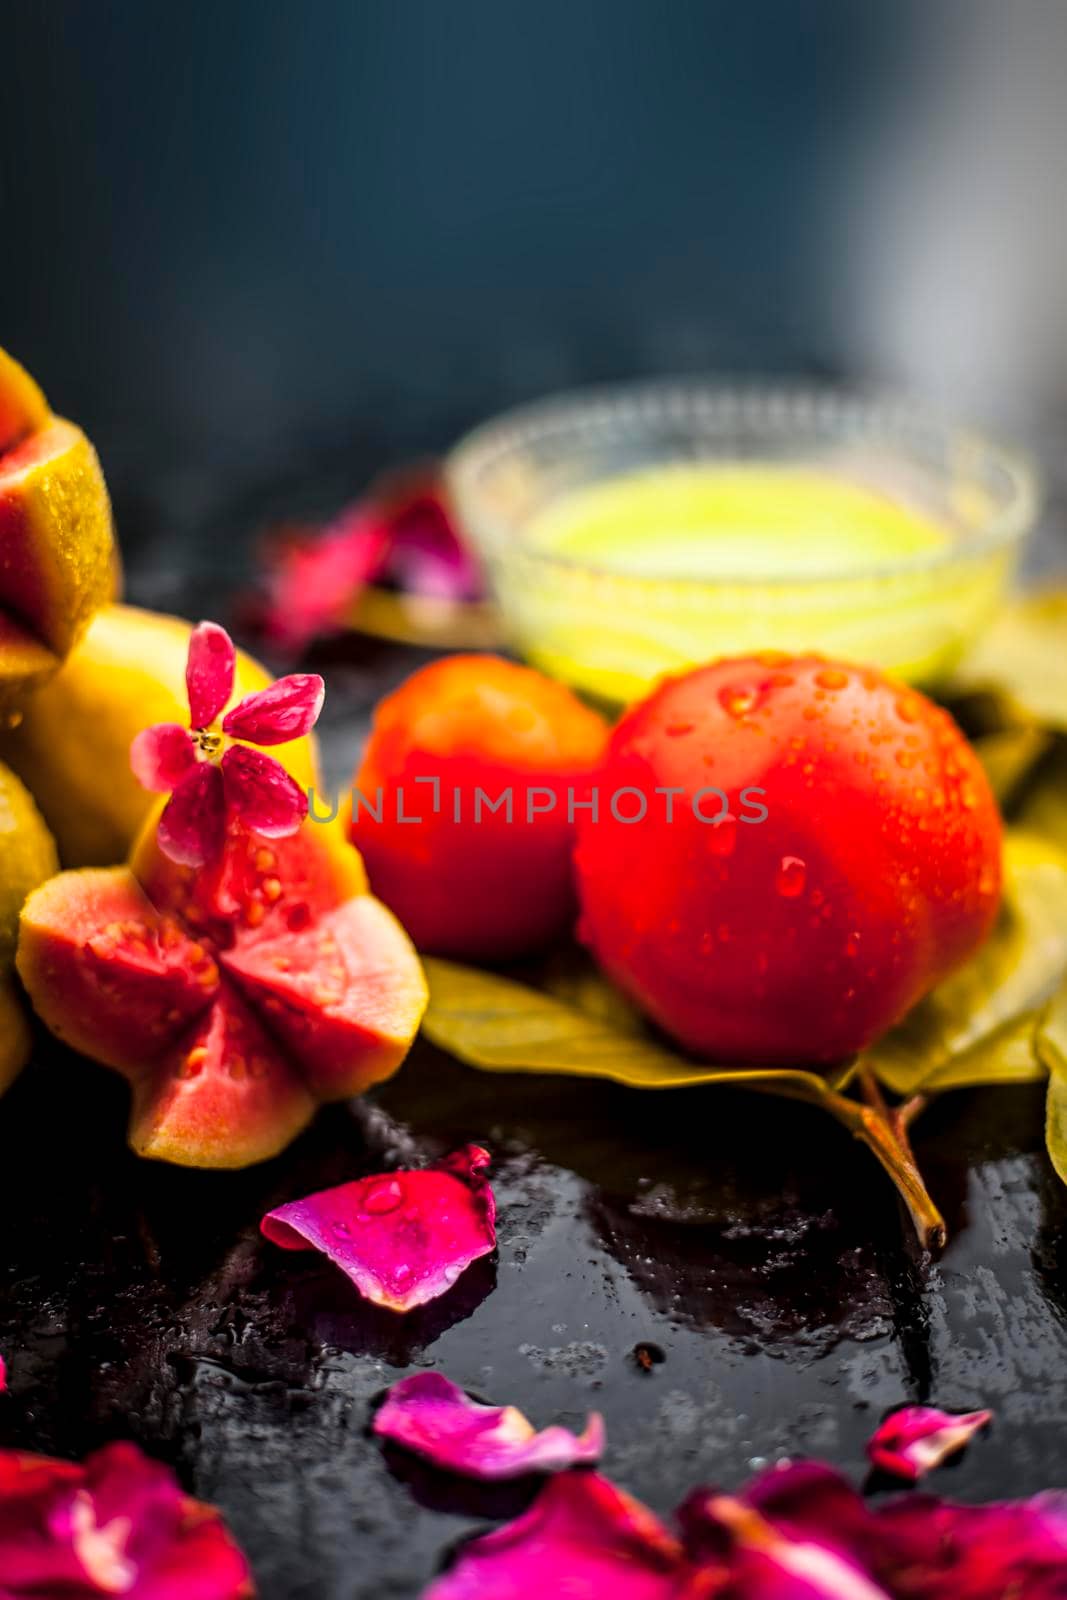 Best cheap face mask for tanned skin on wooden surface un a glass bowl consisting of guava leaves paste well mixed with some tomato pulp. Shot with entire ingredients with fantastic colors.